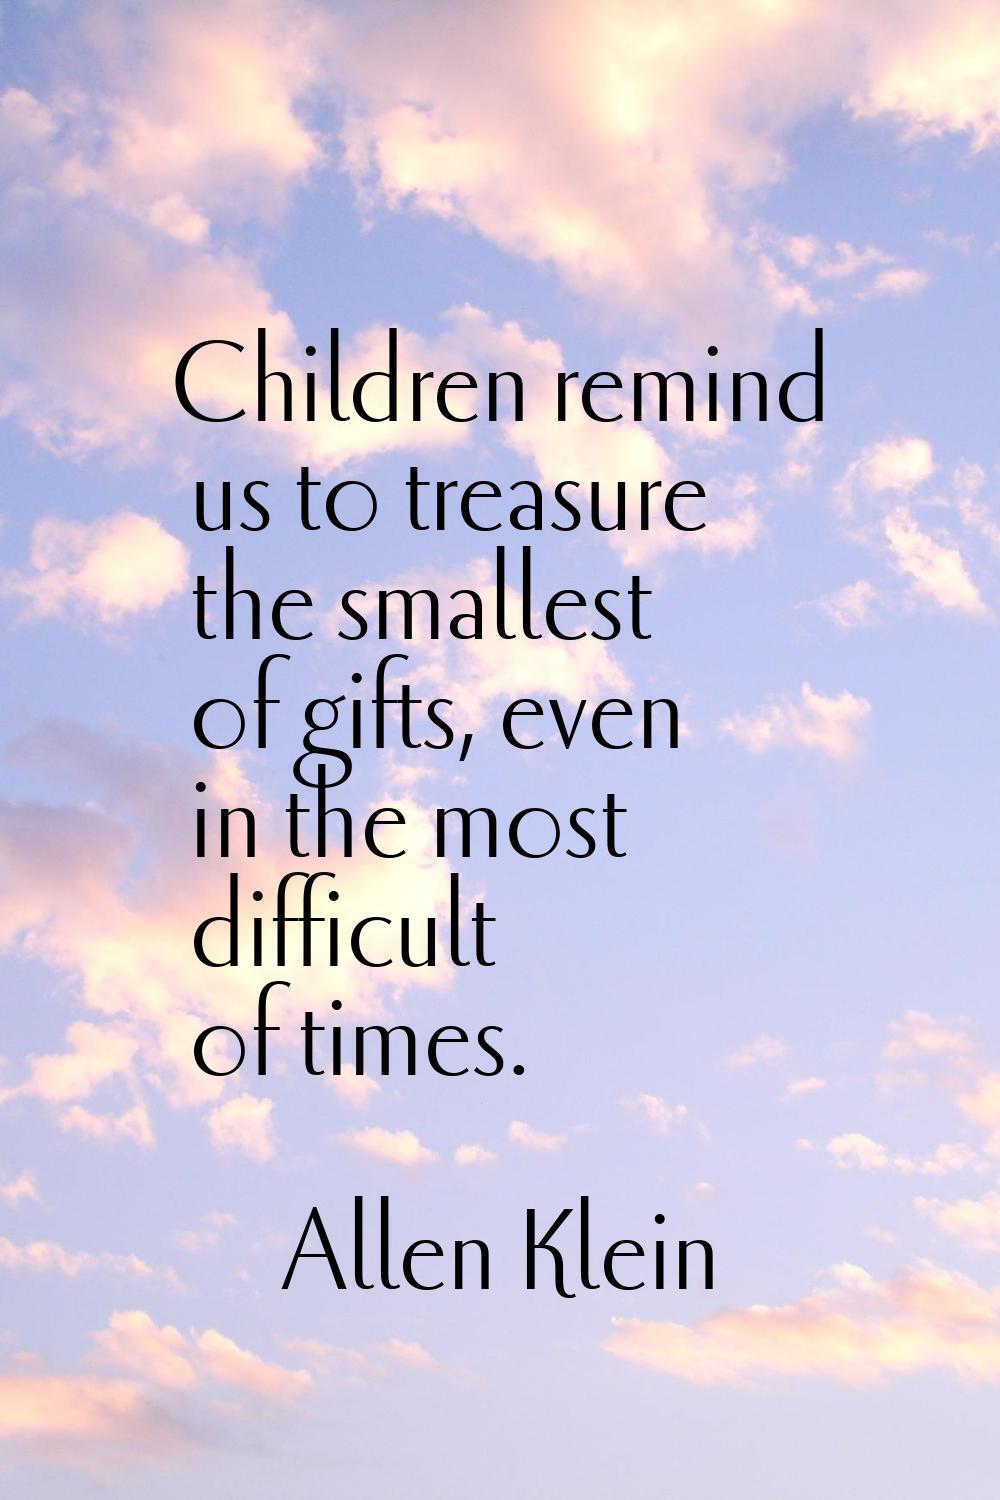 Children remind us to treasure the smallest of gifts, even in the most difficult of times.